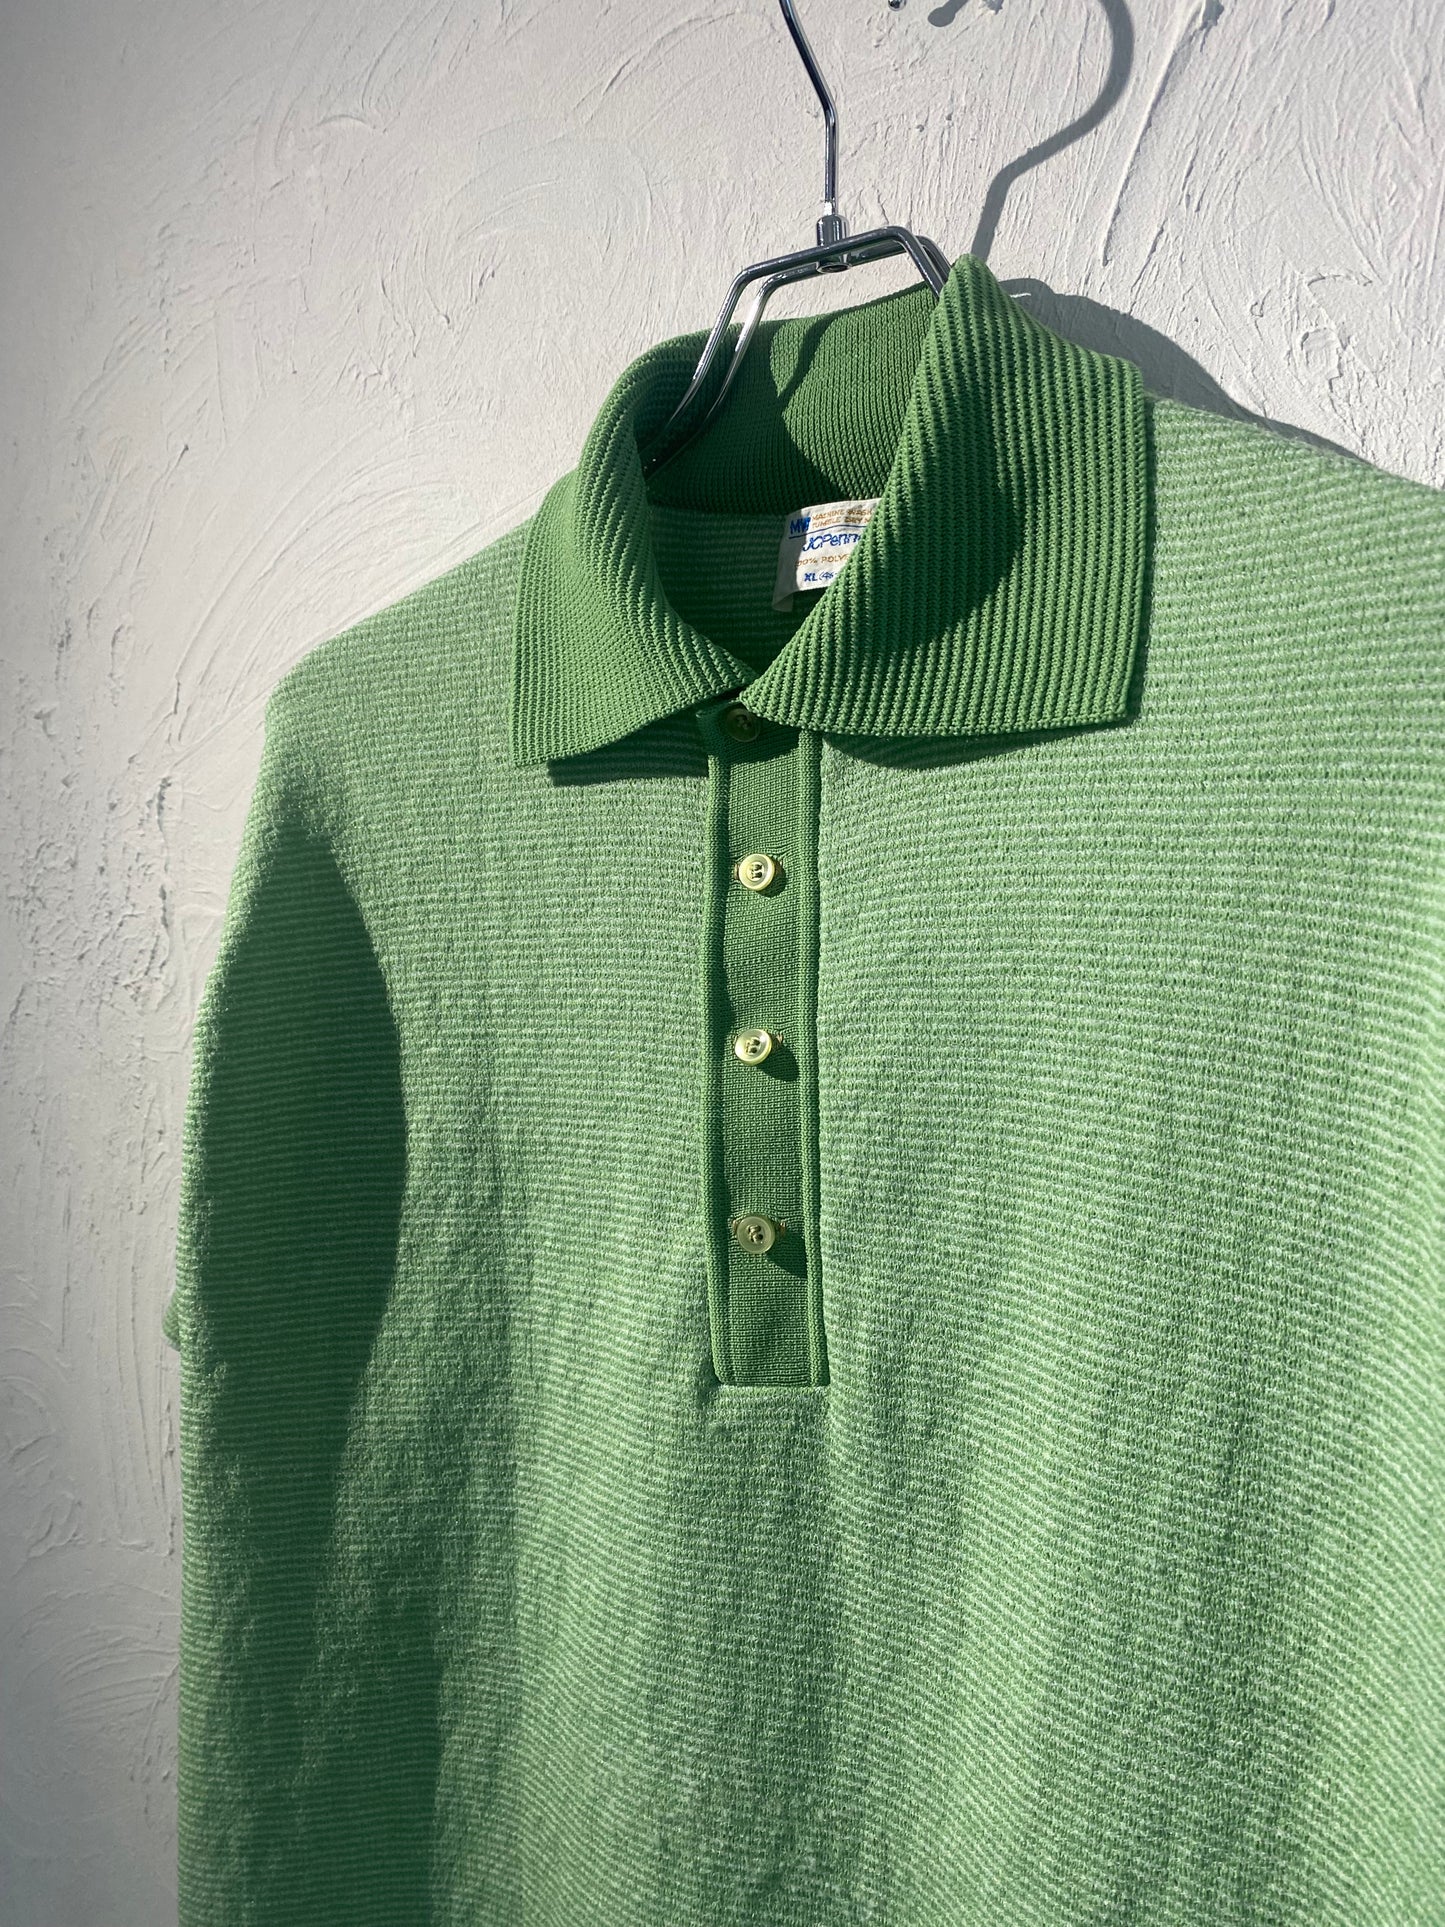 80s JCPenney polo shirt